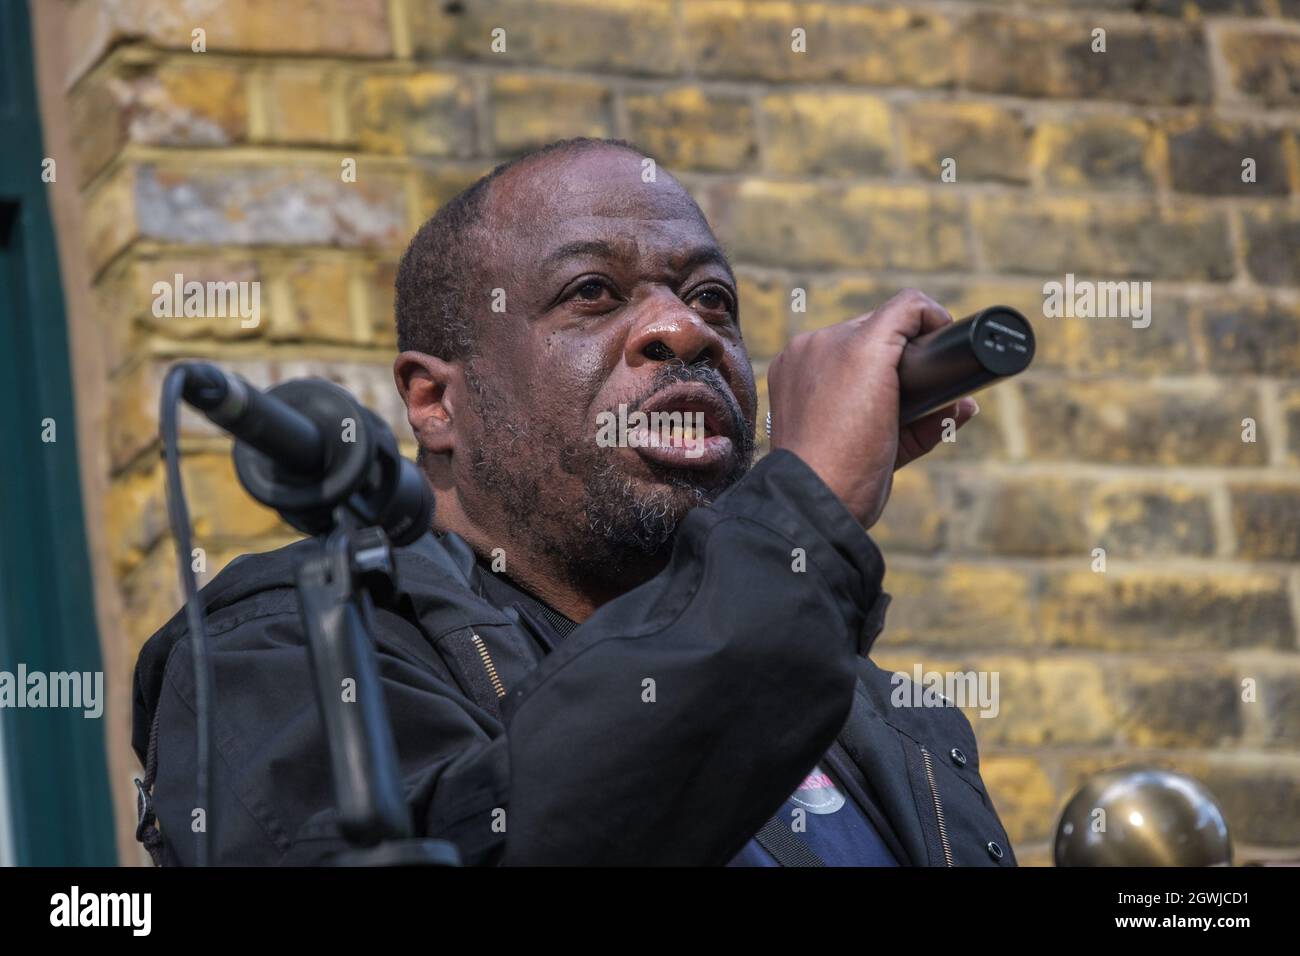 London, UK. 3rd Oct 2021. Weyman Bennett of Stand Up to Racism speaking at the rally on the 85th anniversary of the Battle of Cable St to remember the act of unity against the fascist threat when the Jewish and Irish communities of East London and their allies blocked the streets to prevent Oswald Mosley and his British Union of Fascists marching through. They marched from Dock St along Cable St to a rally next to the mural in St George's Gardens chaired by Jewish historian David Rosenberg and local Bengali activist Julie Begum. Peter Marshall/Alamy Live News Stock Photo